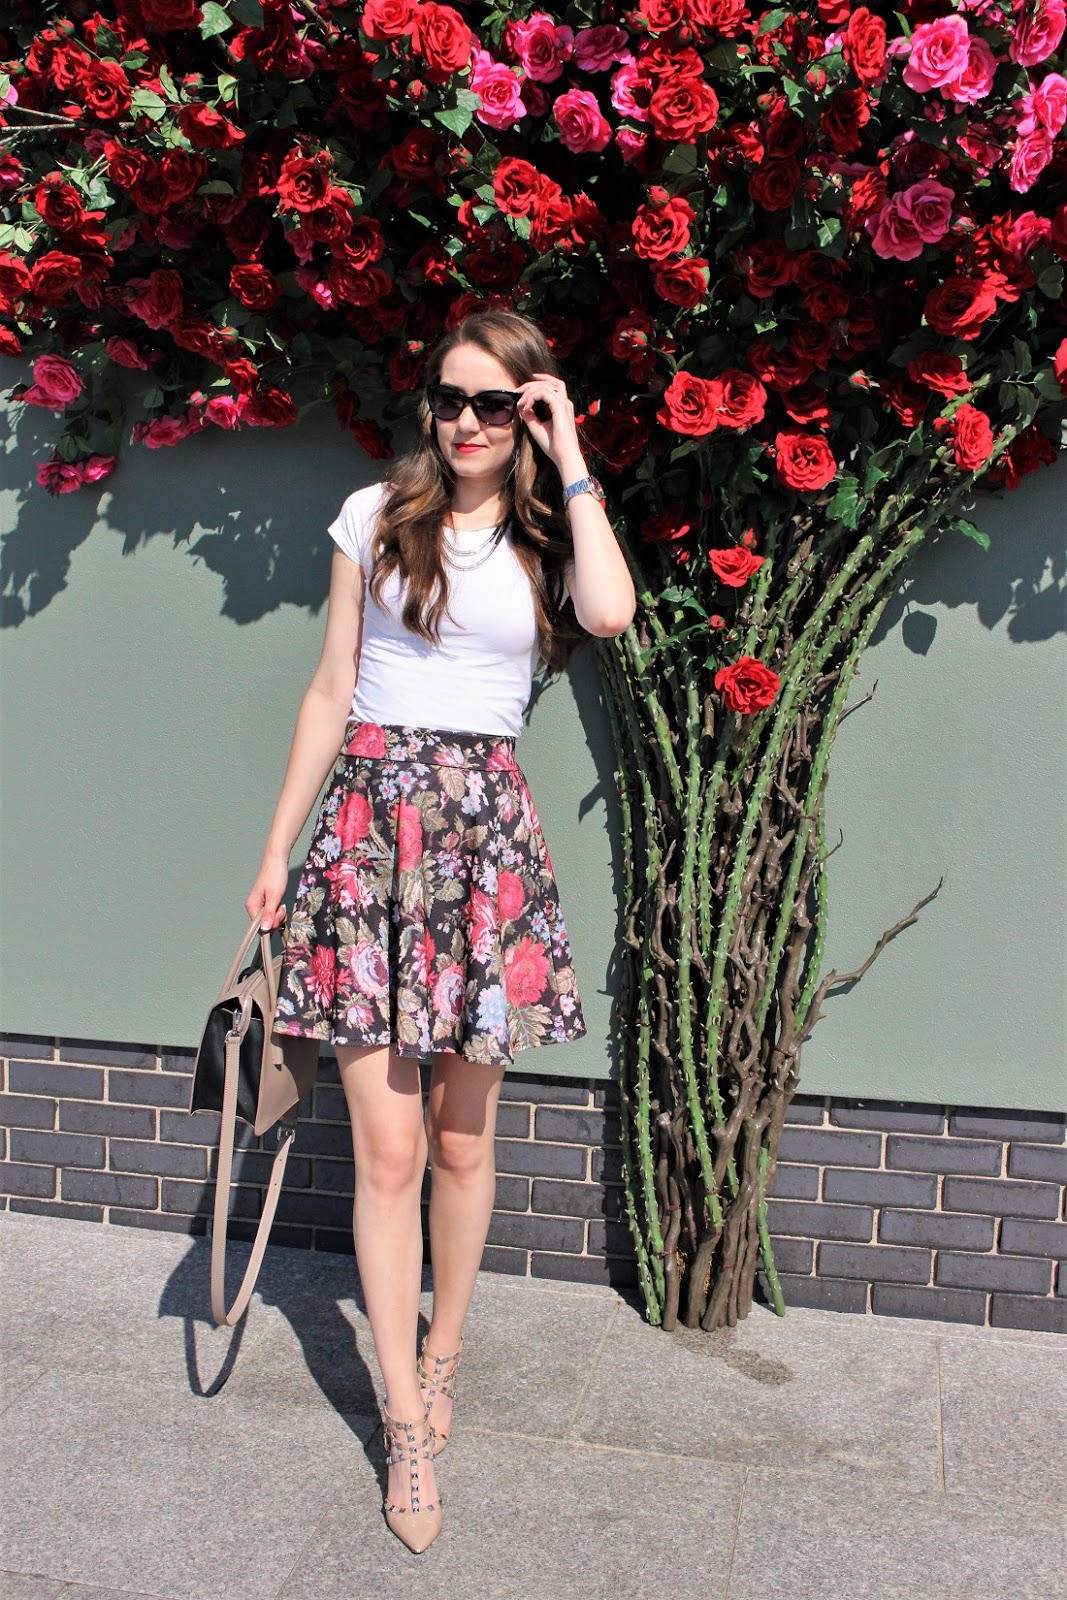 OOTD 53 :: Shopping in Kildare Village : Girly Summer Outfit - Skater ...